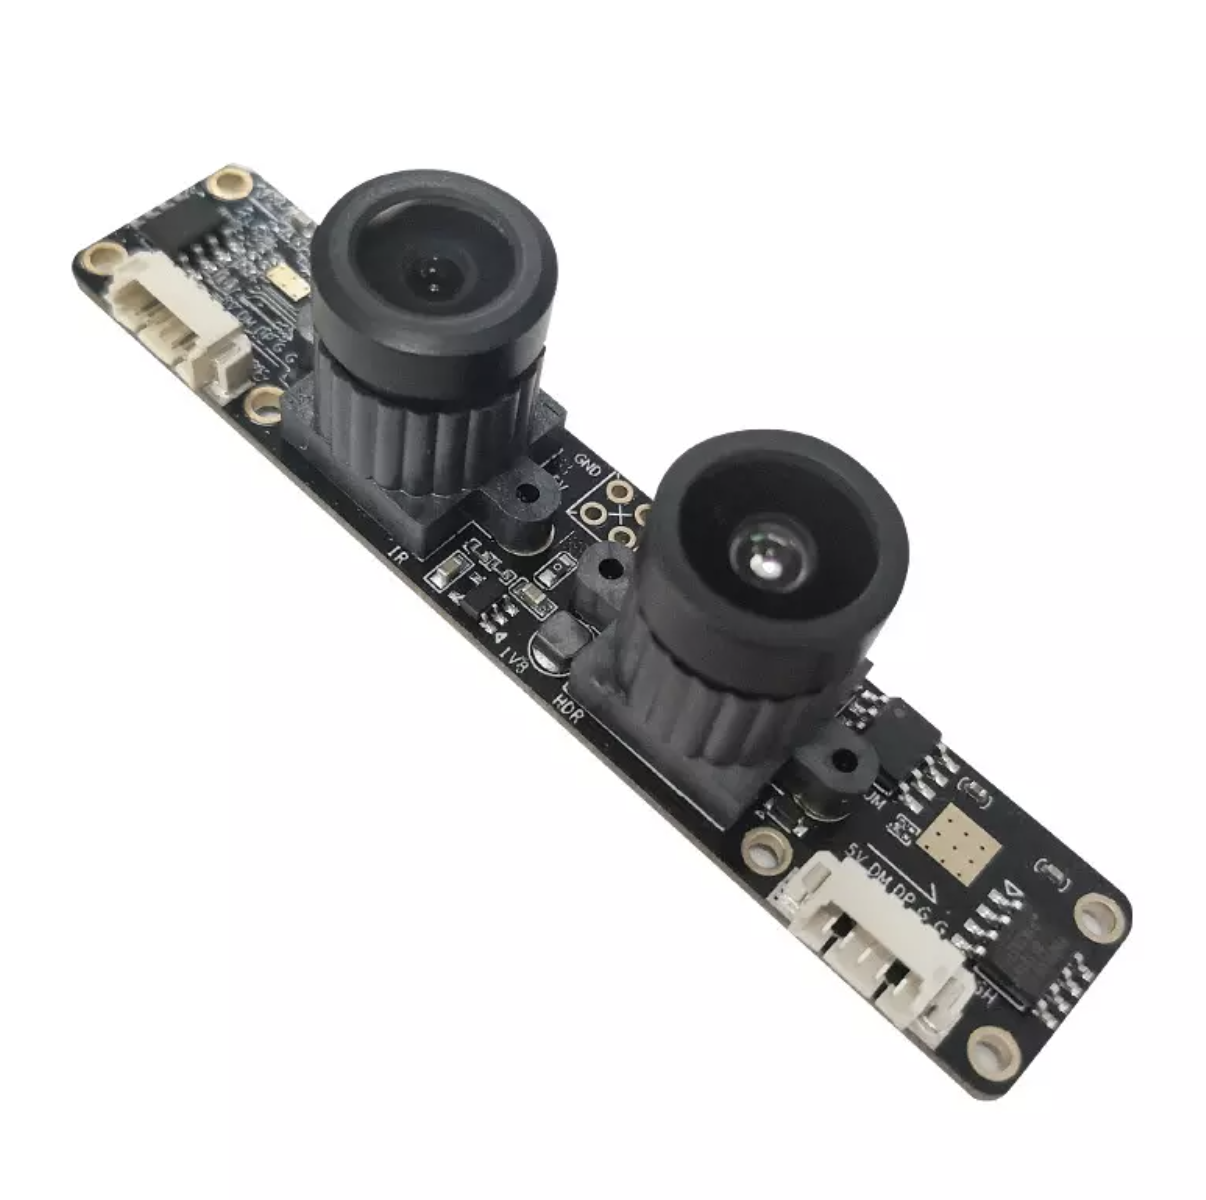 Hot sale Pcb Circuit -  2MP HD 1080P Face Recognition AR0230 F22 Binocular HDR IR USB2.0 Wide Angle camera module – Ronghua